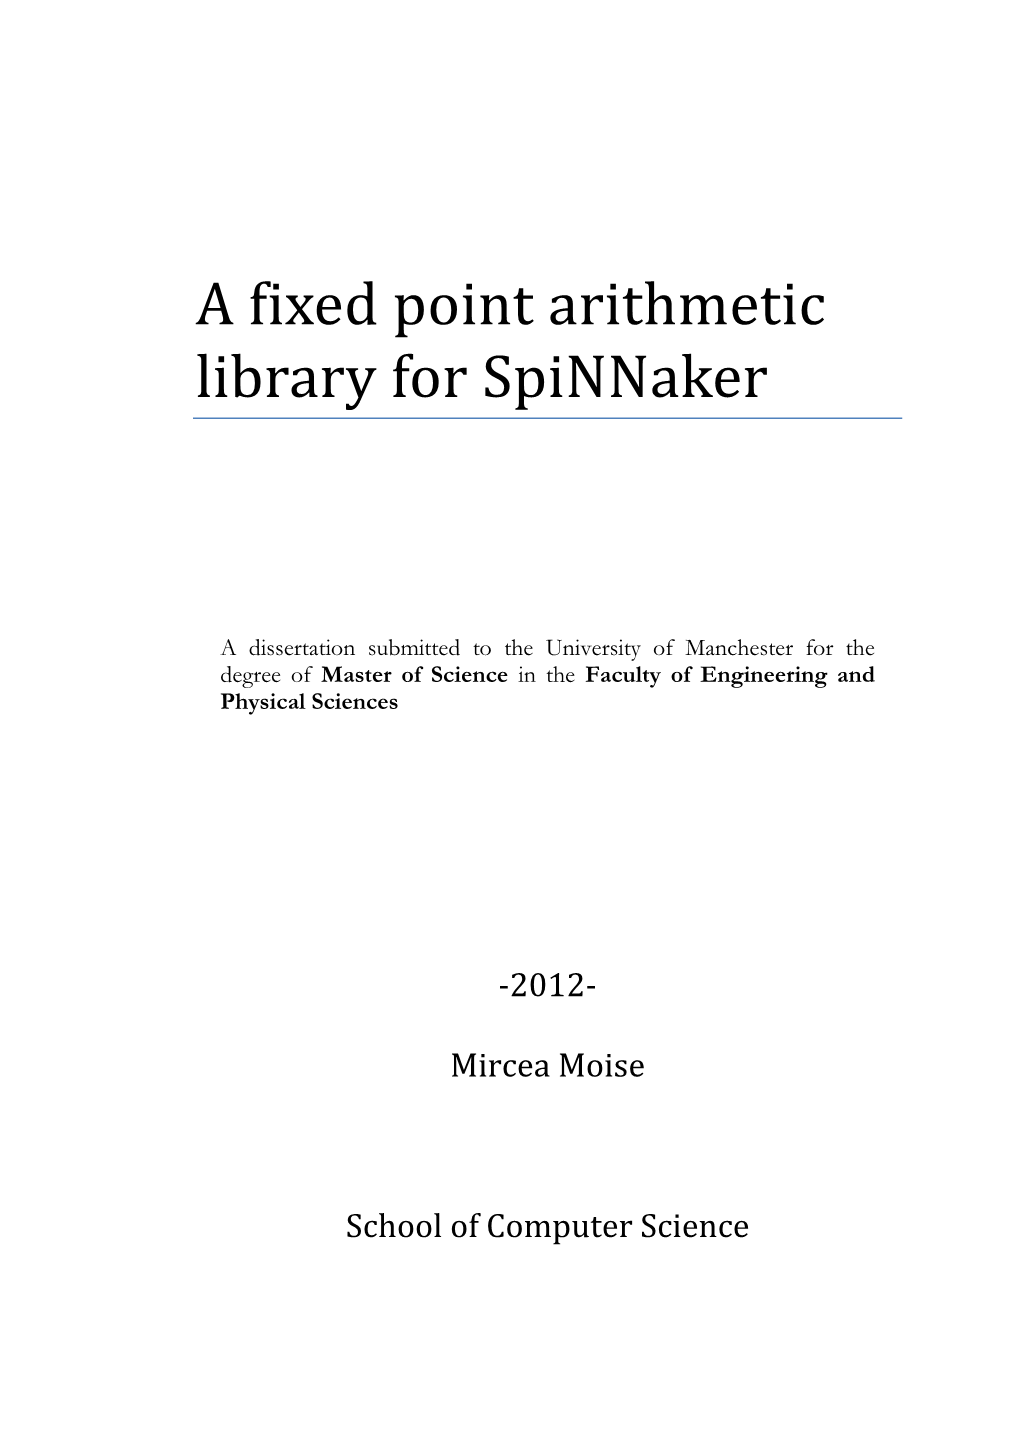 A Fixed Point Arithmetic Library for Spinnaker